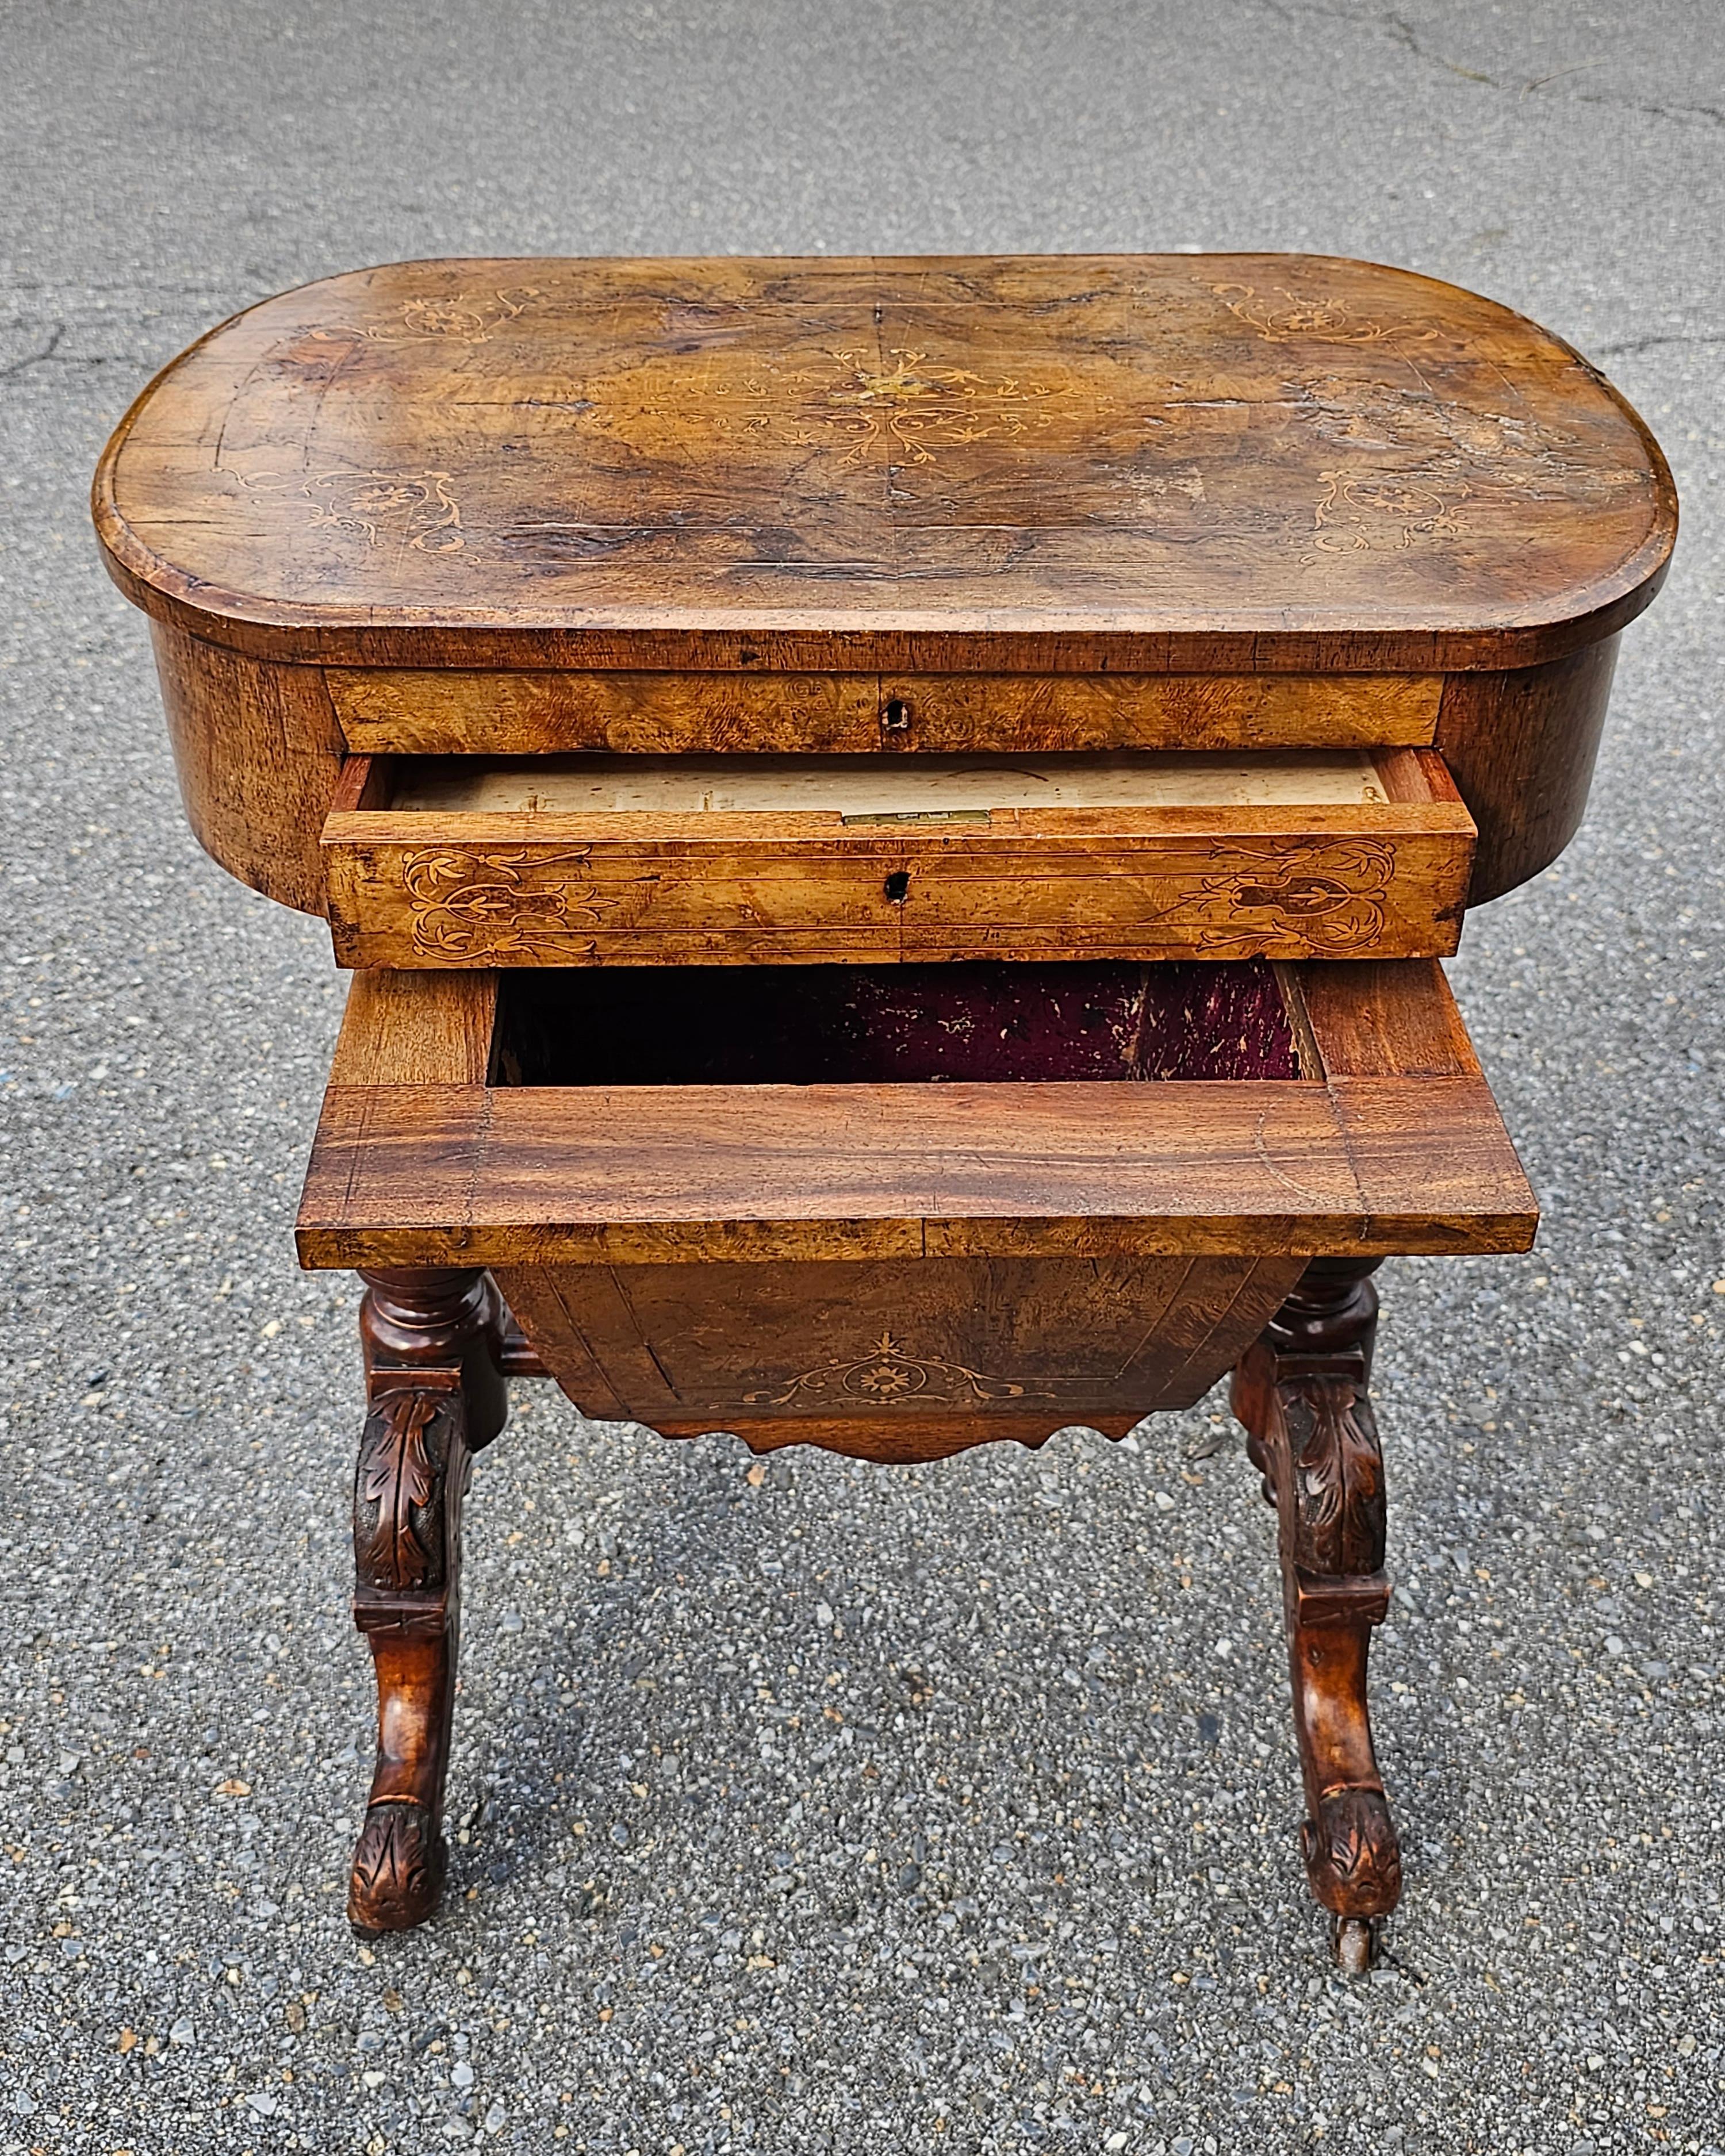 A 19th Century Victorian Walnut and Marquetry Burl sewing table with plenty 9f storage and on Wheels. Measures 24.25